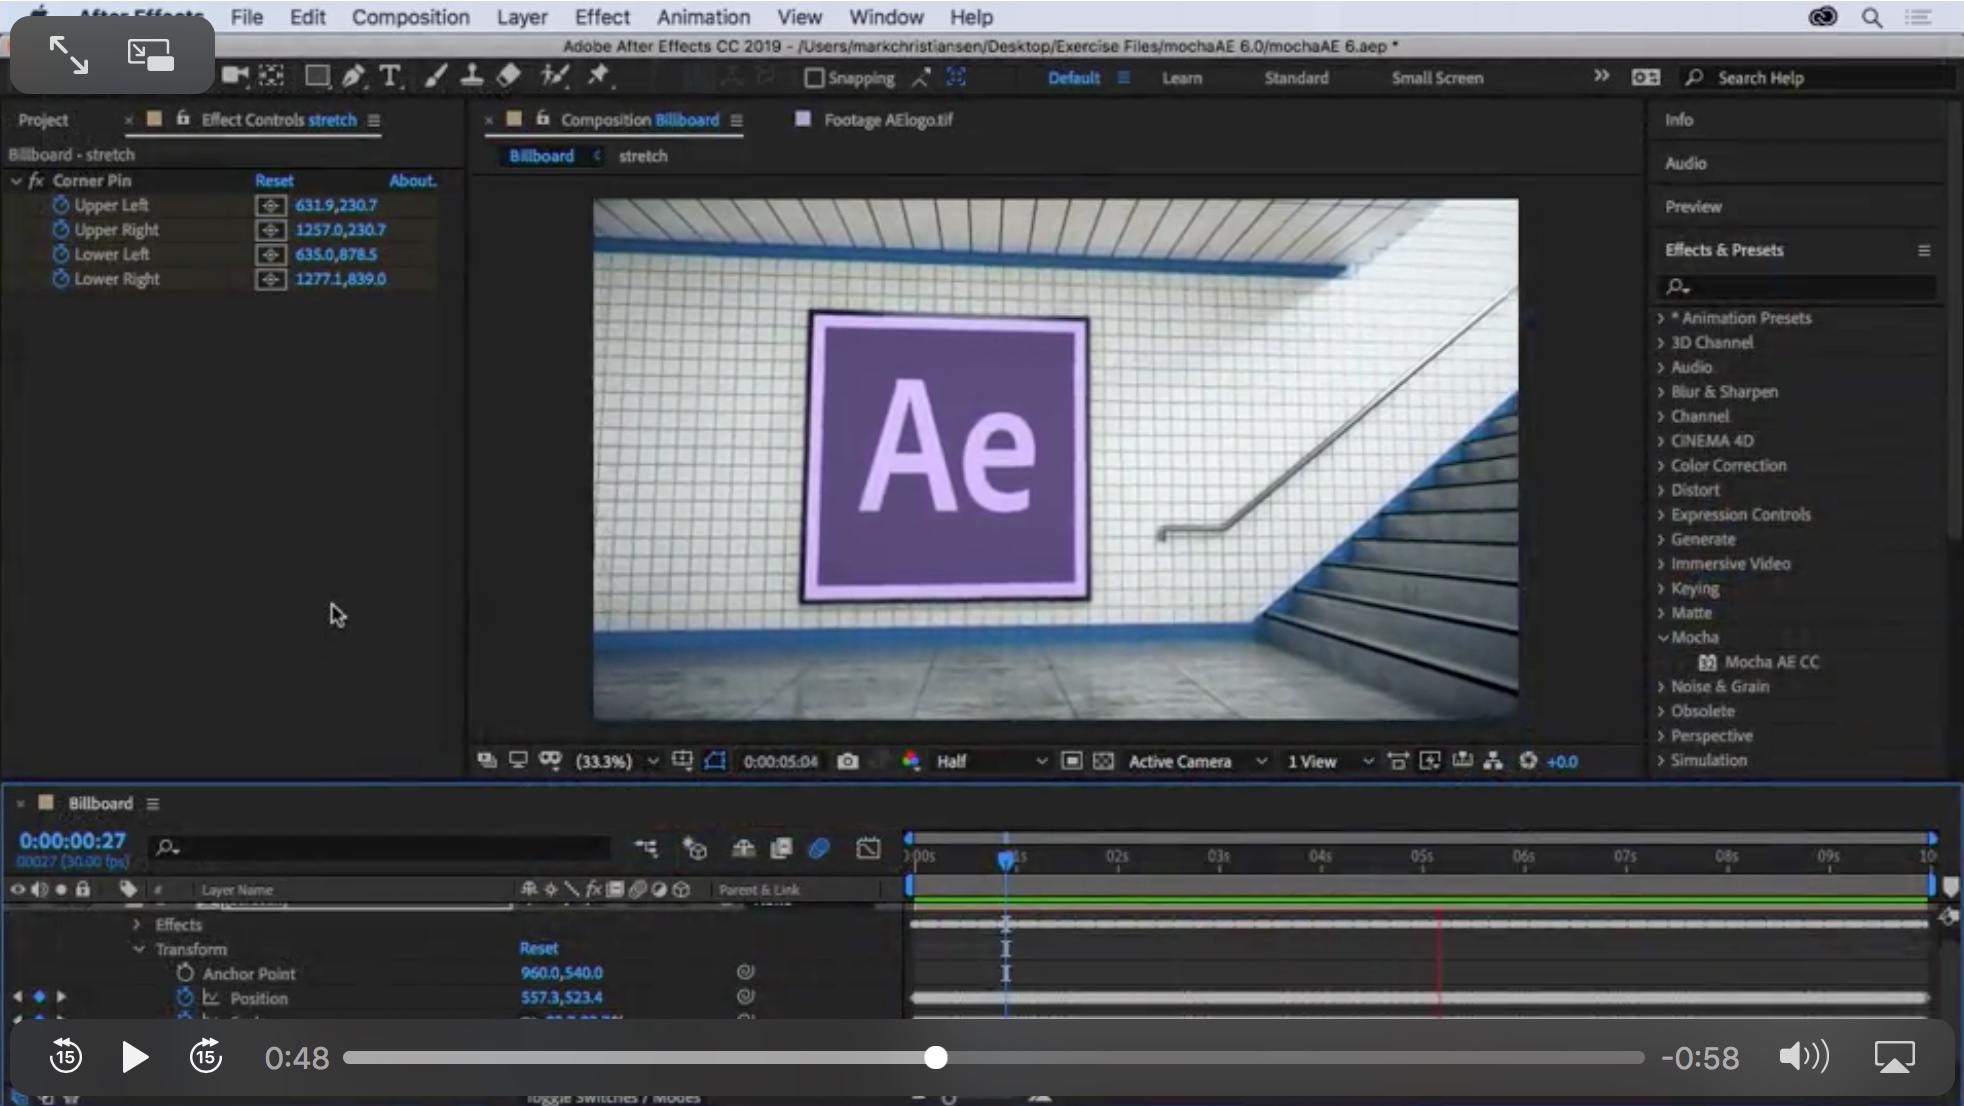 after effects cc 2017 crack